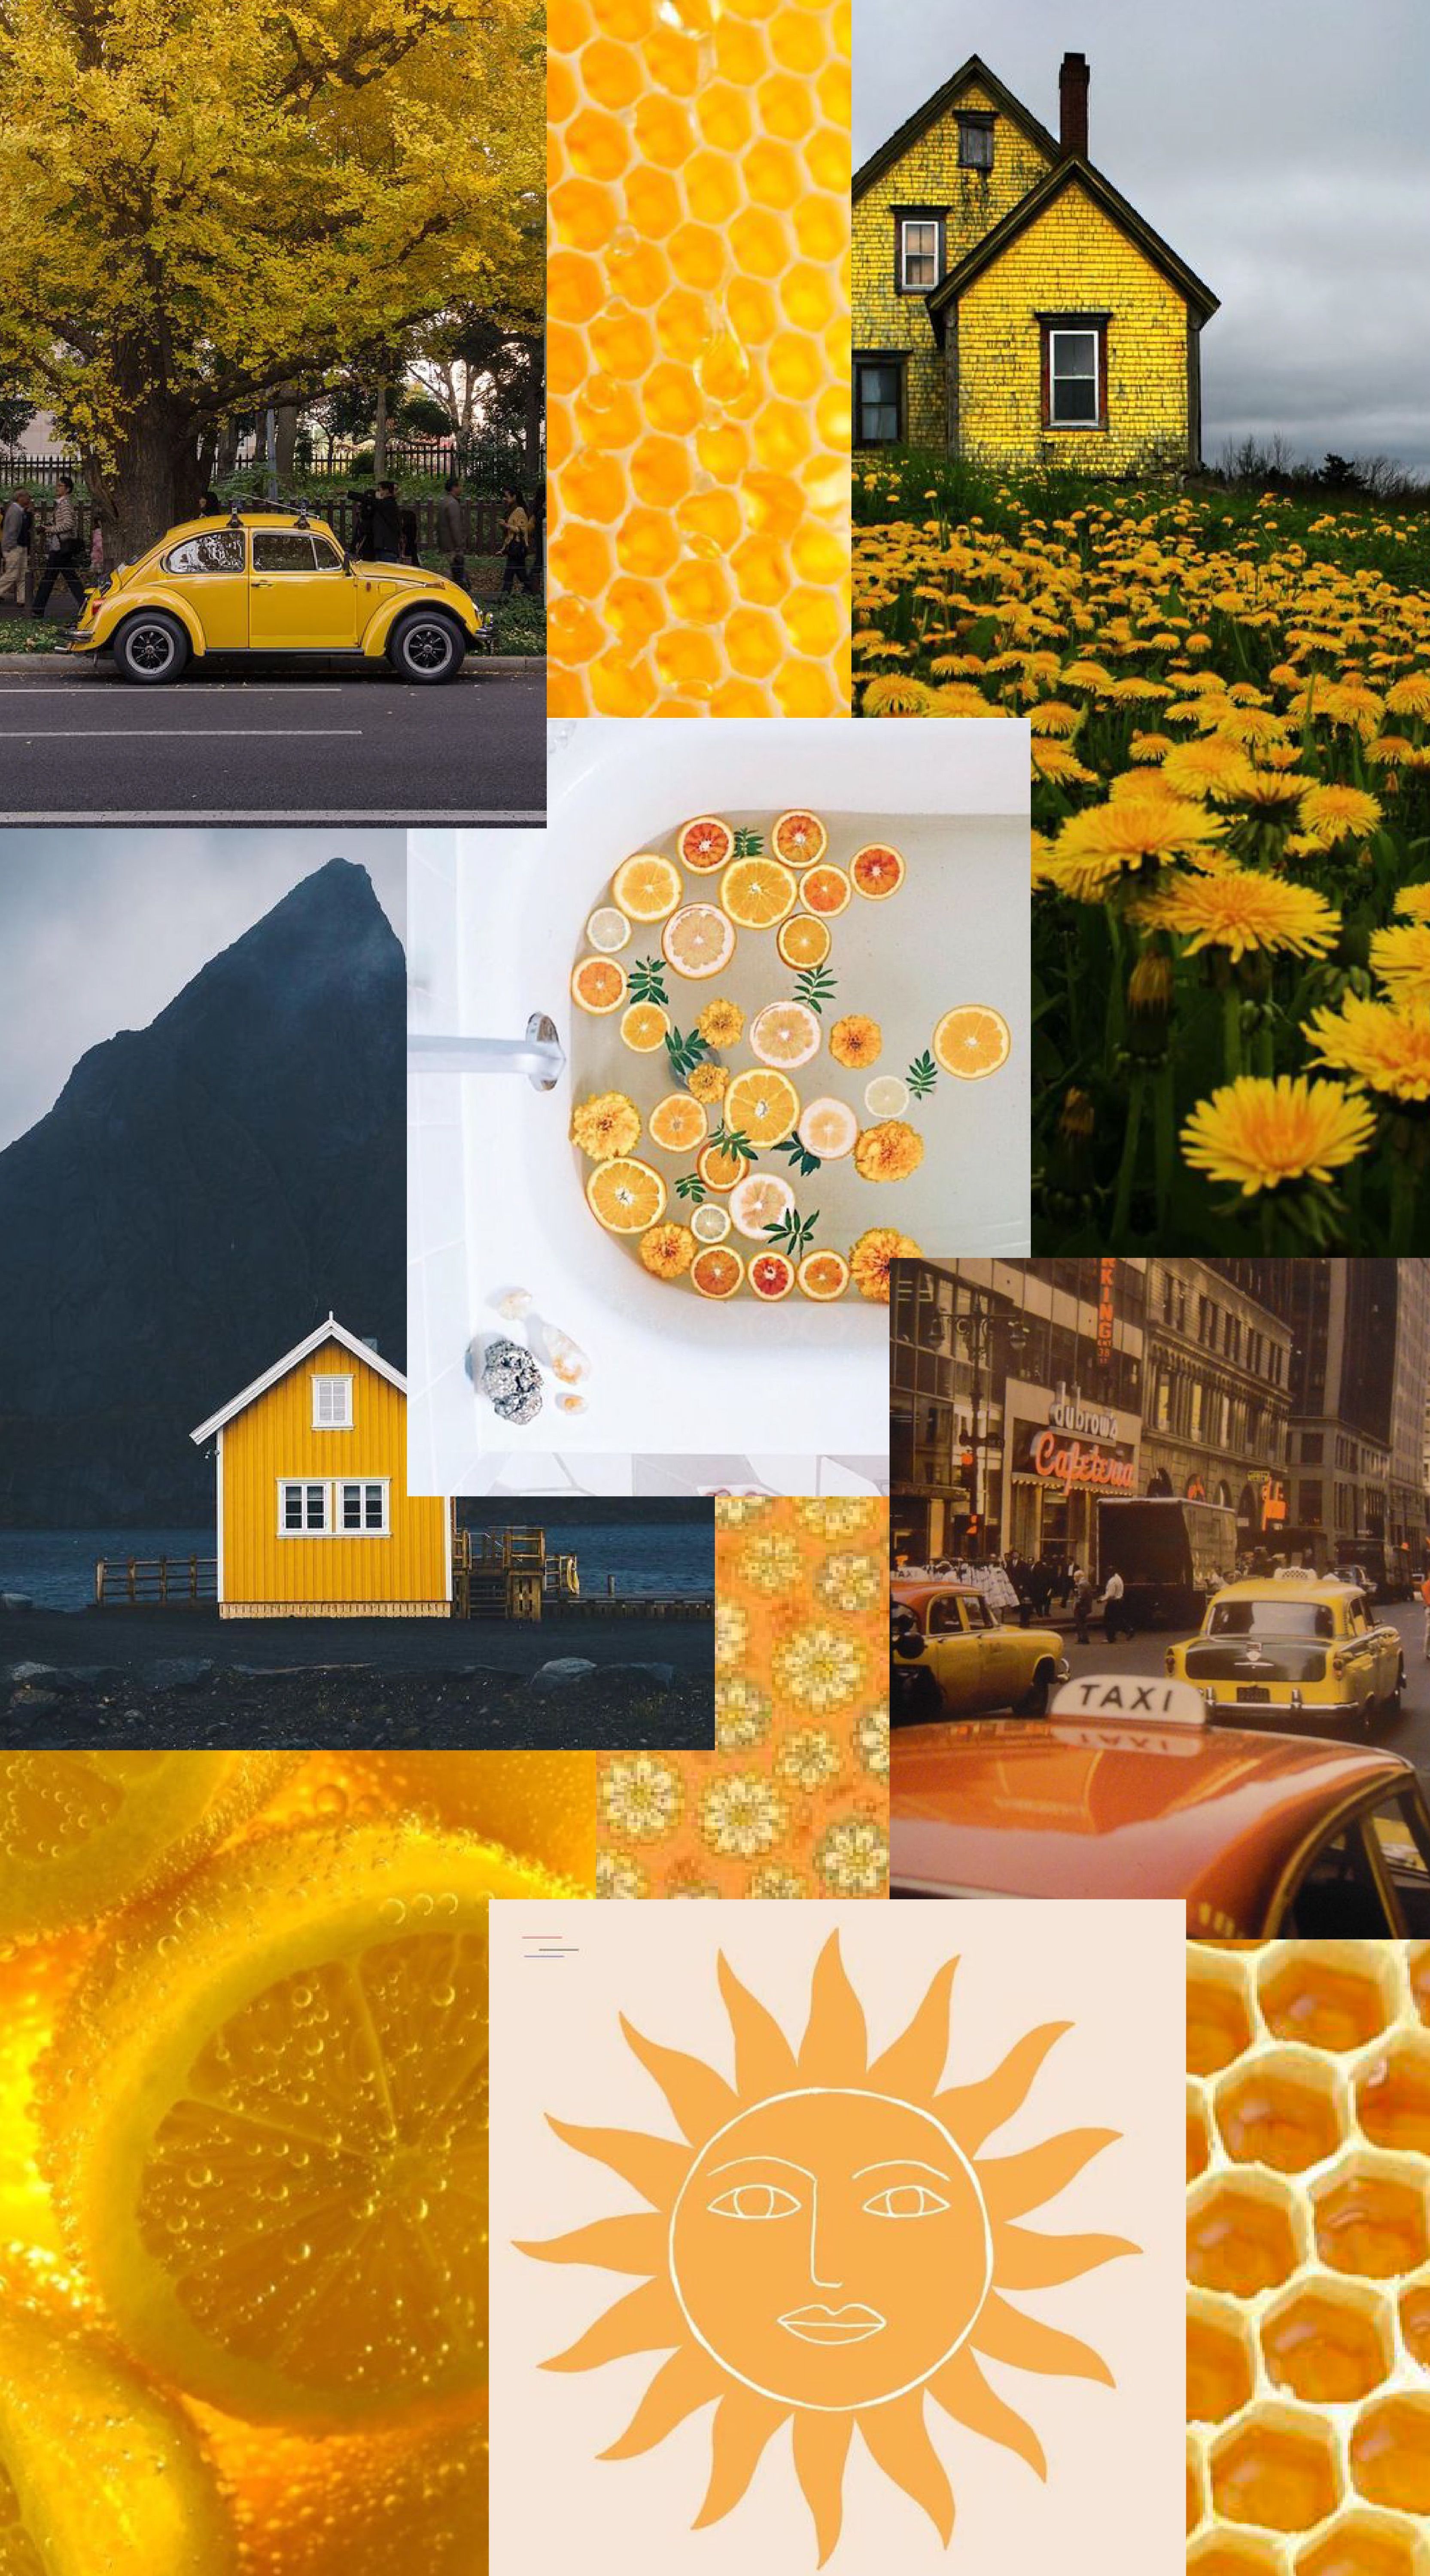 yellow summer aesthetic imagery for phone wallpaper. Summer wallpaper, Edgy wallpaper, Summer aesthetic